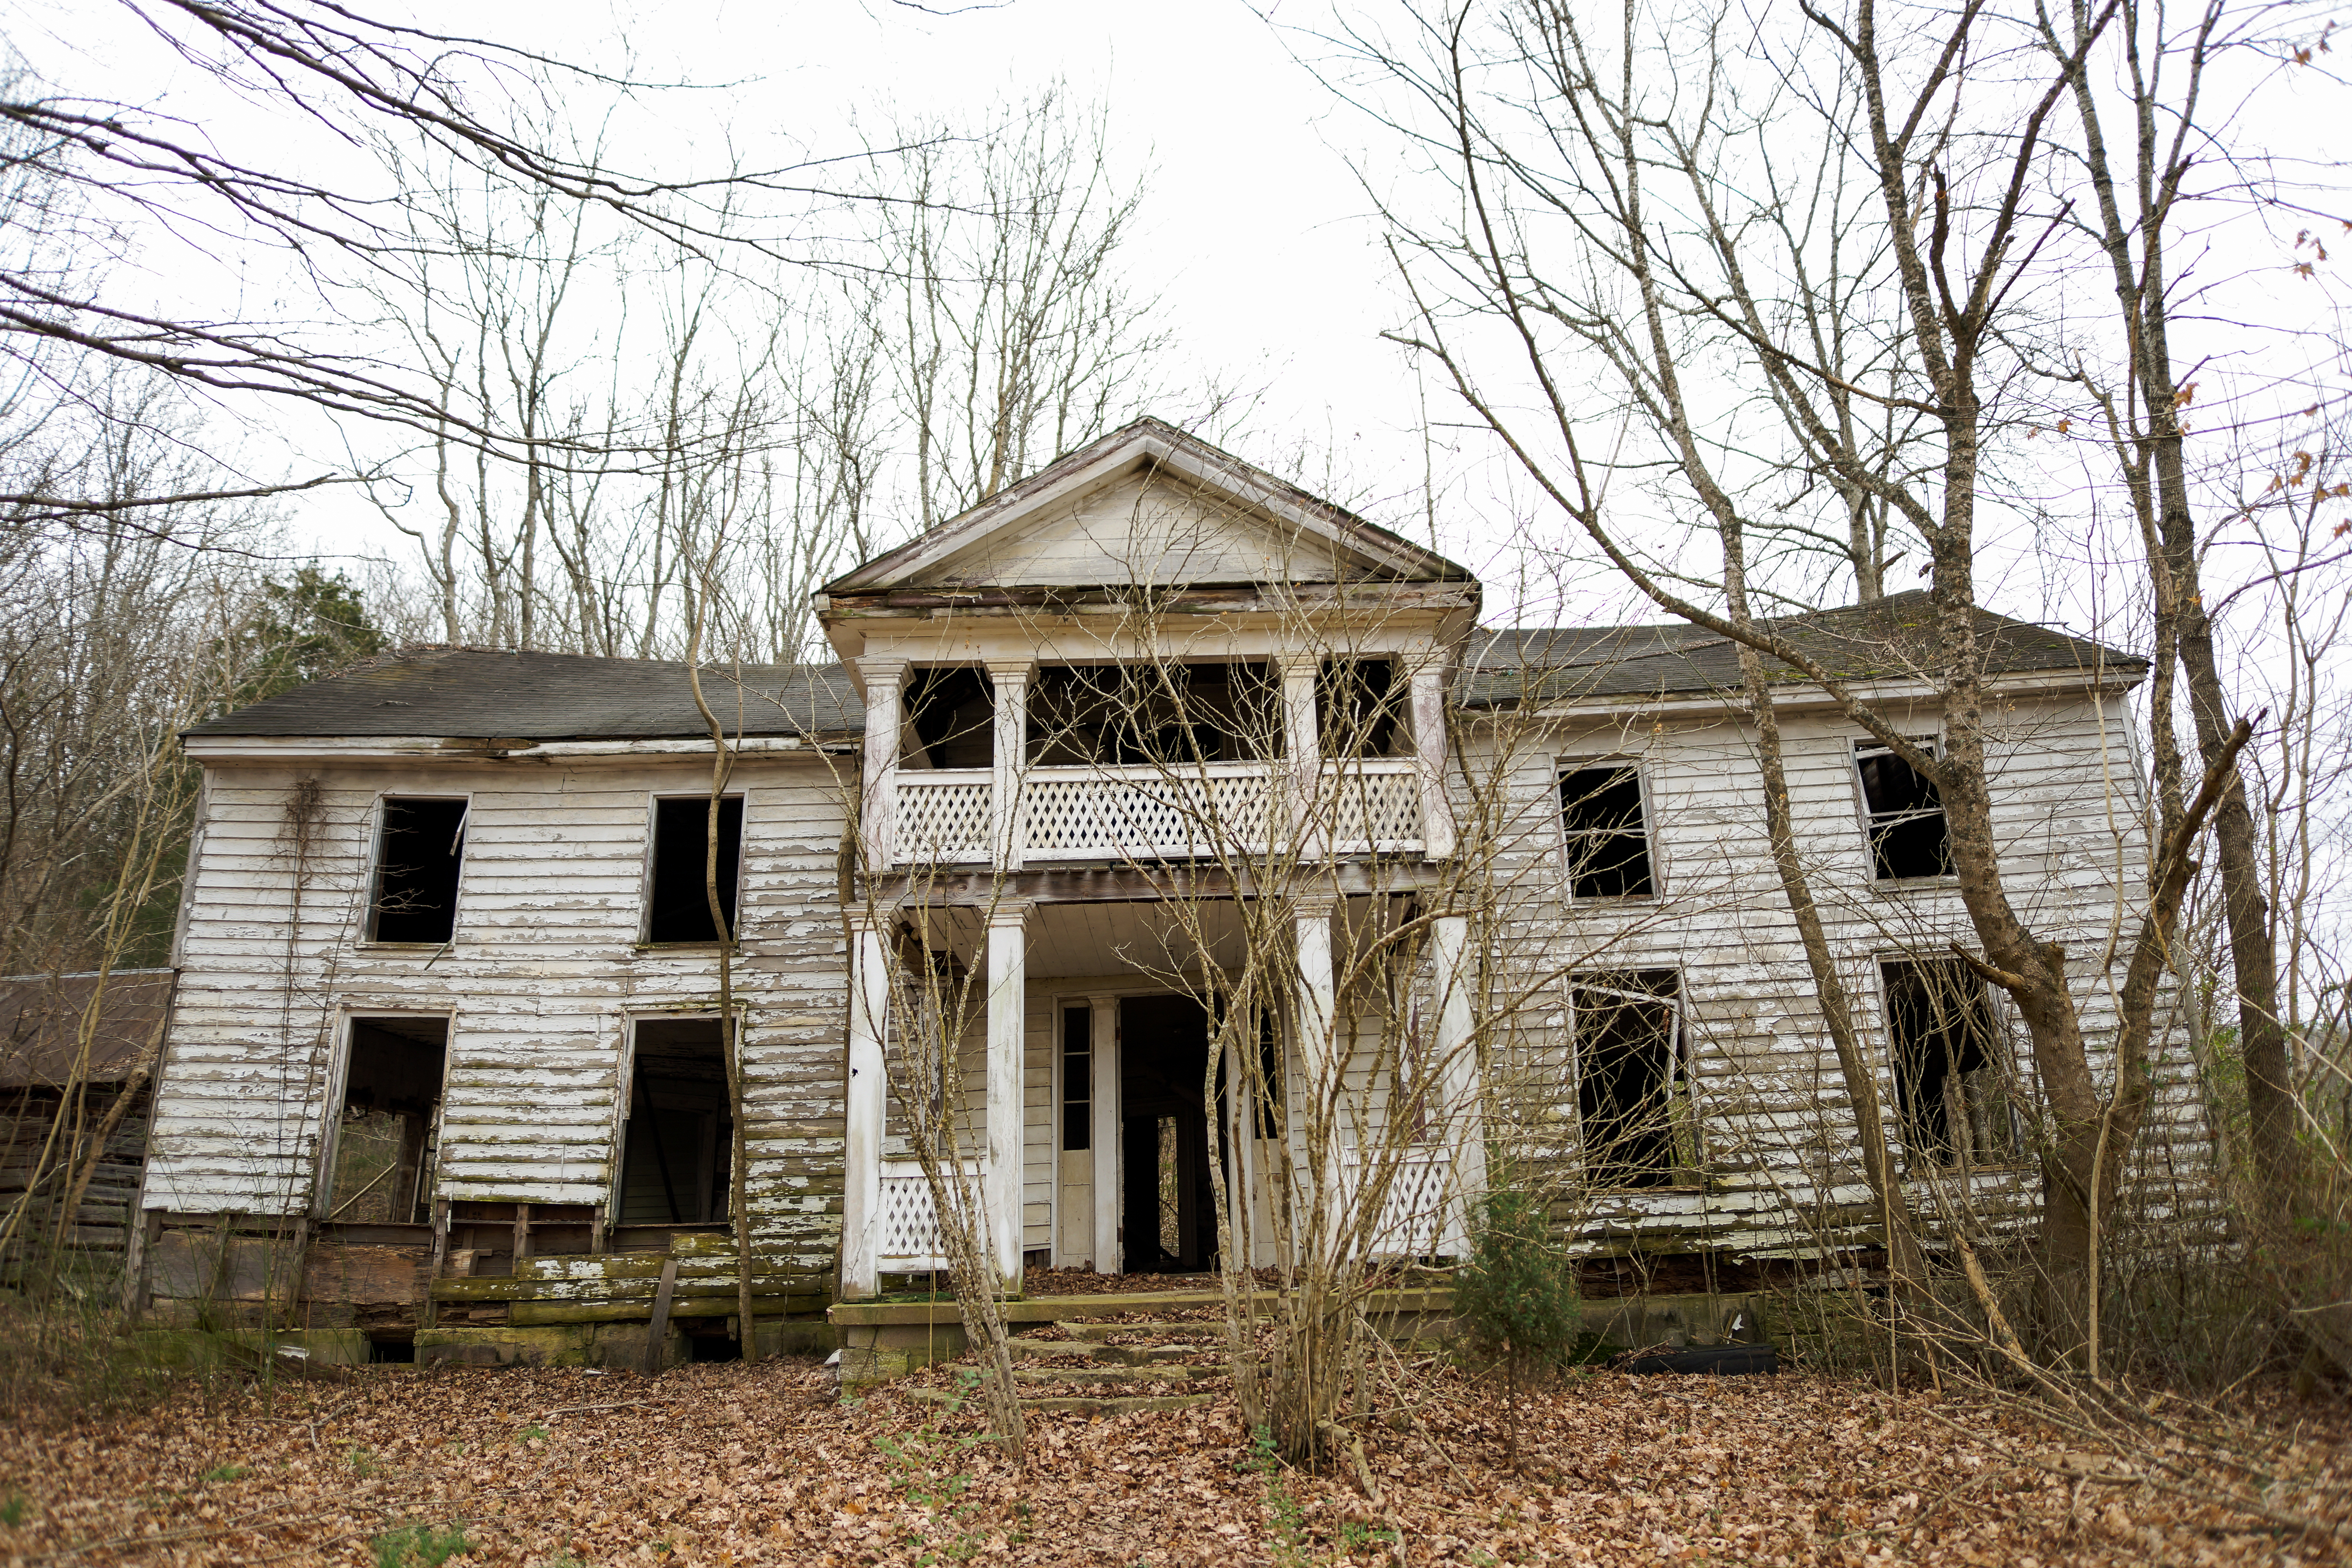 A dilapidated colonial-style white house in the colonial style sits in a woodland setting with lots of dead trees. 